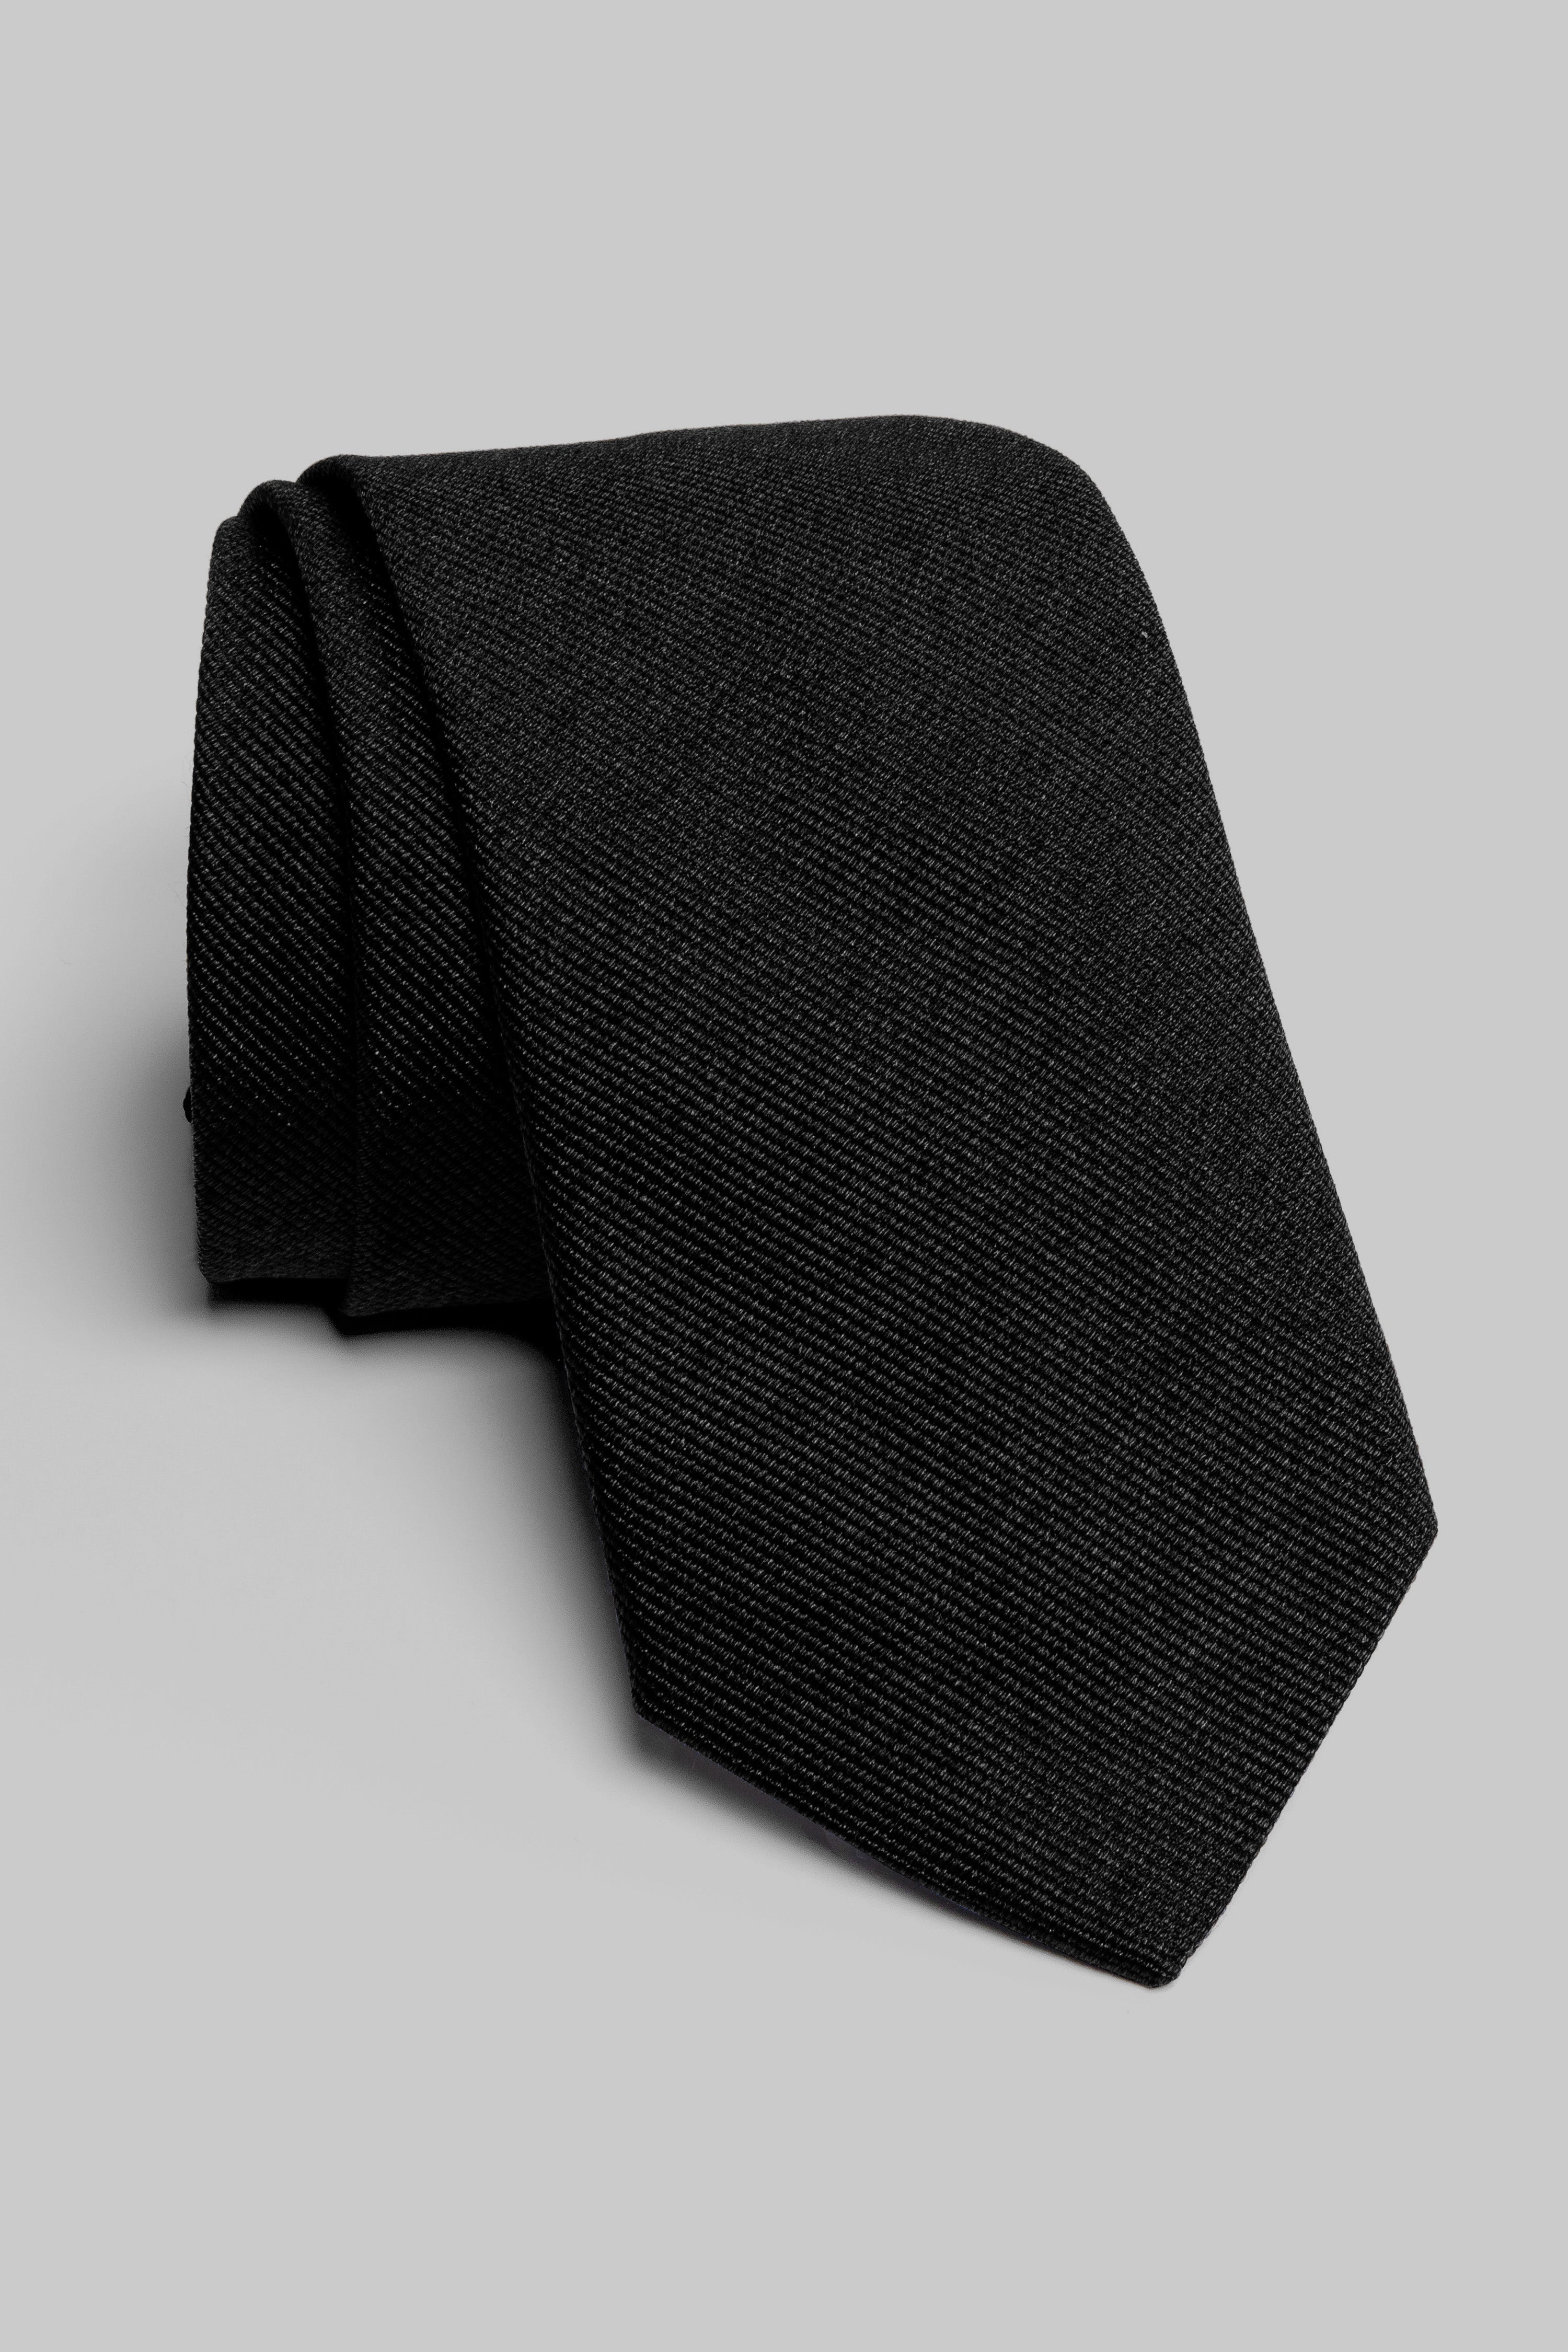 Alt view 1 Bowman Solid Woven Tie in Black